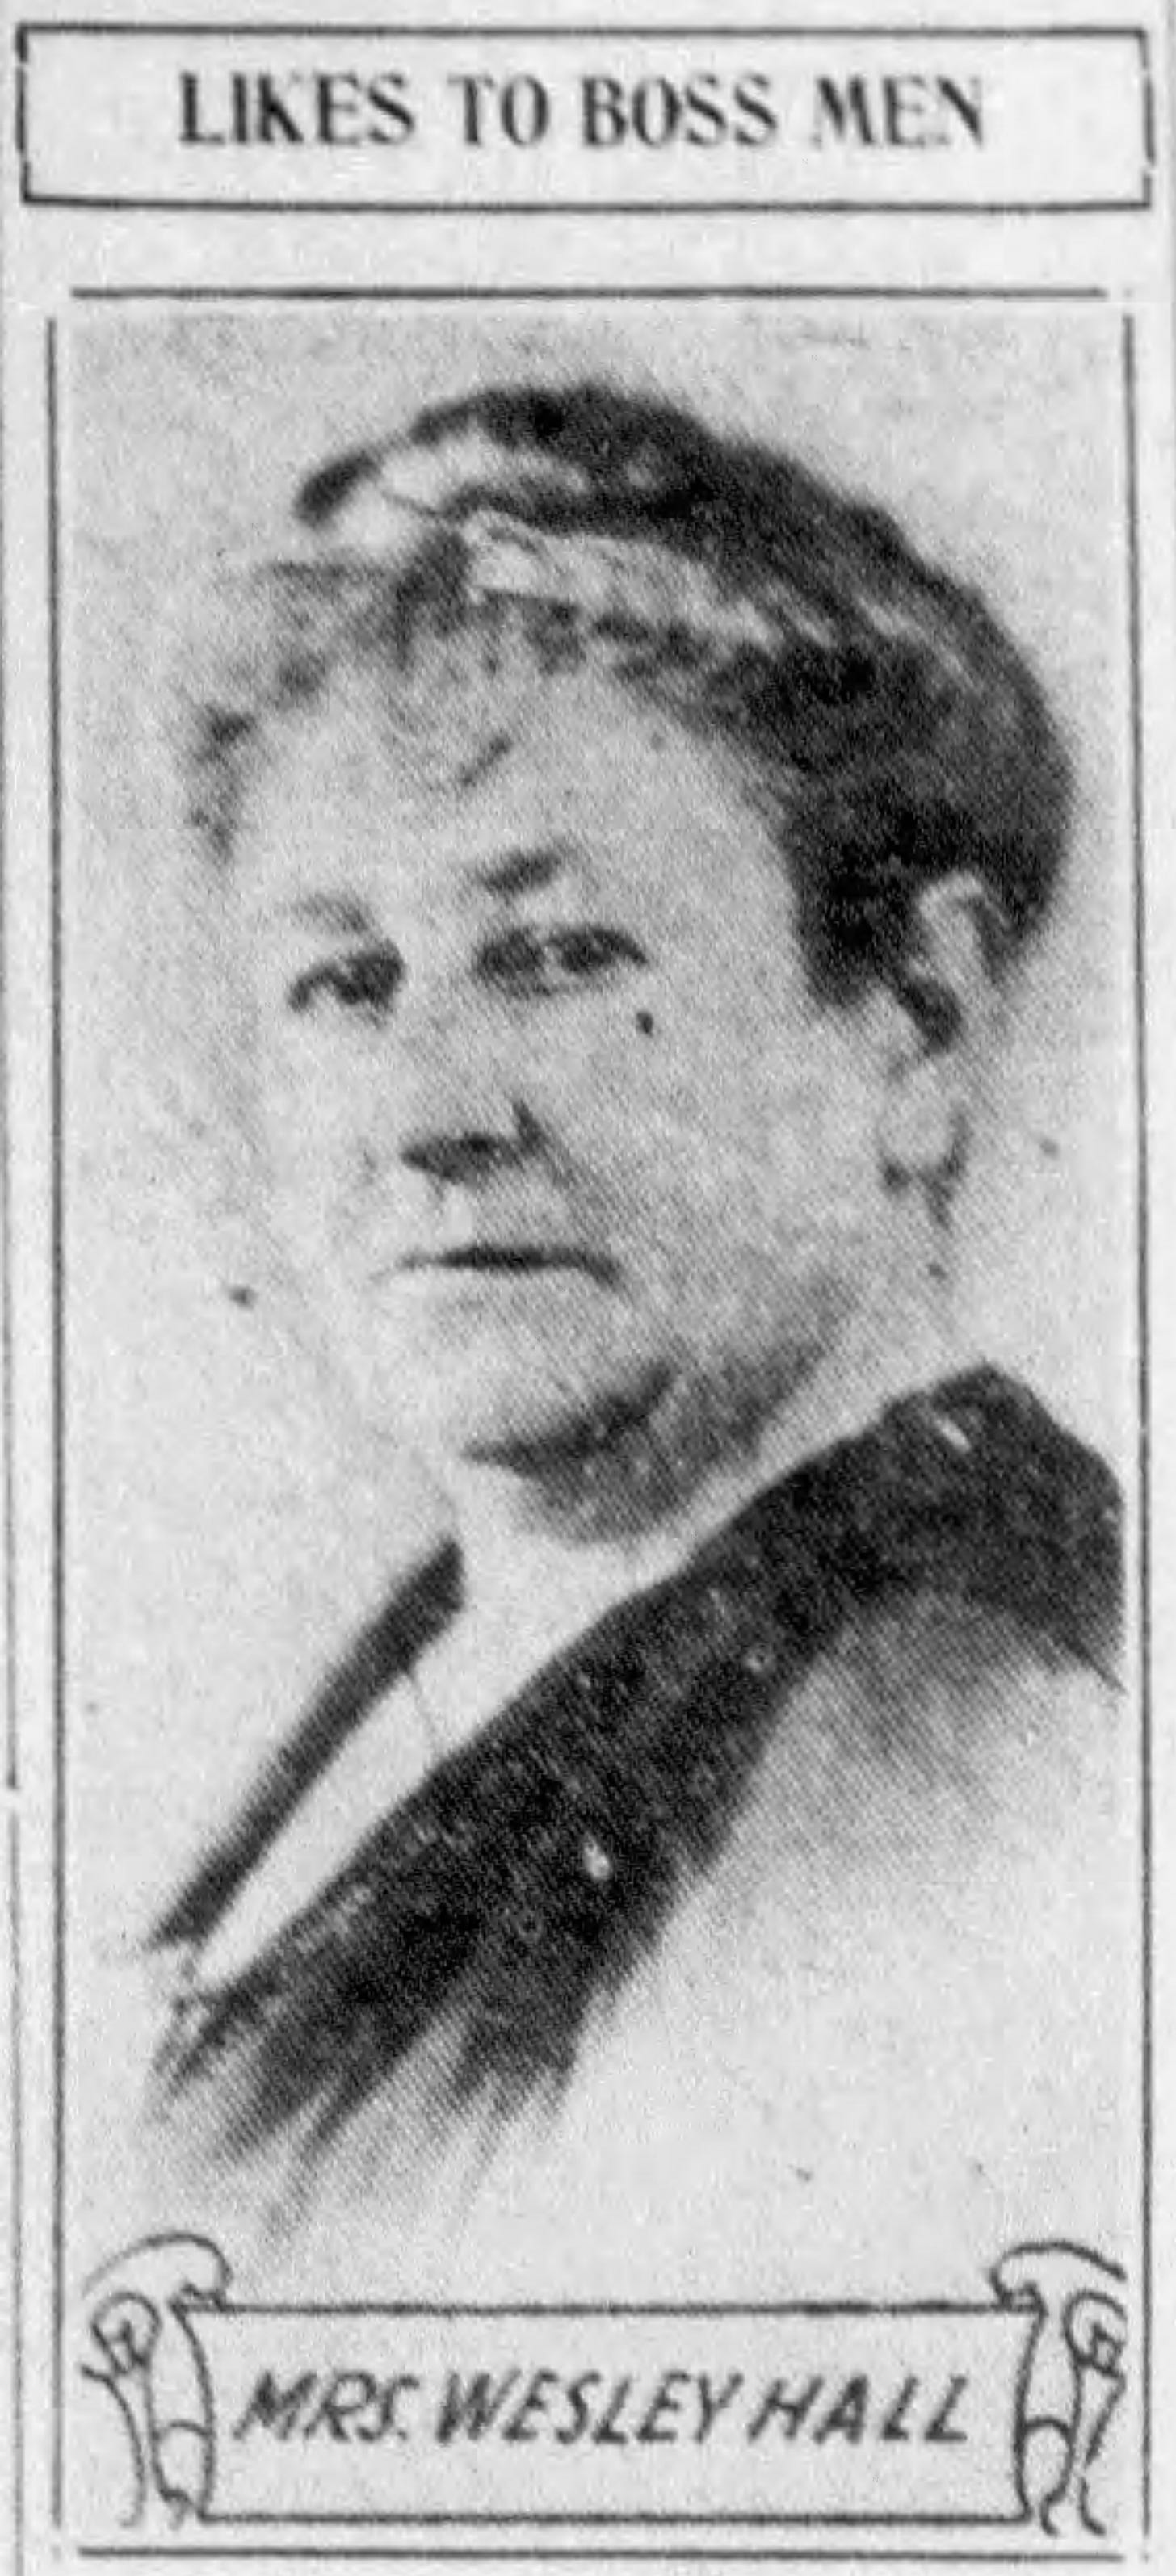 Image is a photograph from a newspaper of Lydia Hall, aka Mrs. Wesley Hall. Above her likeness is the caption "Likes to Boss Men."